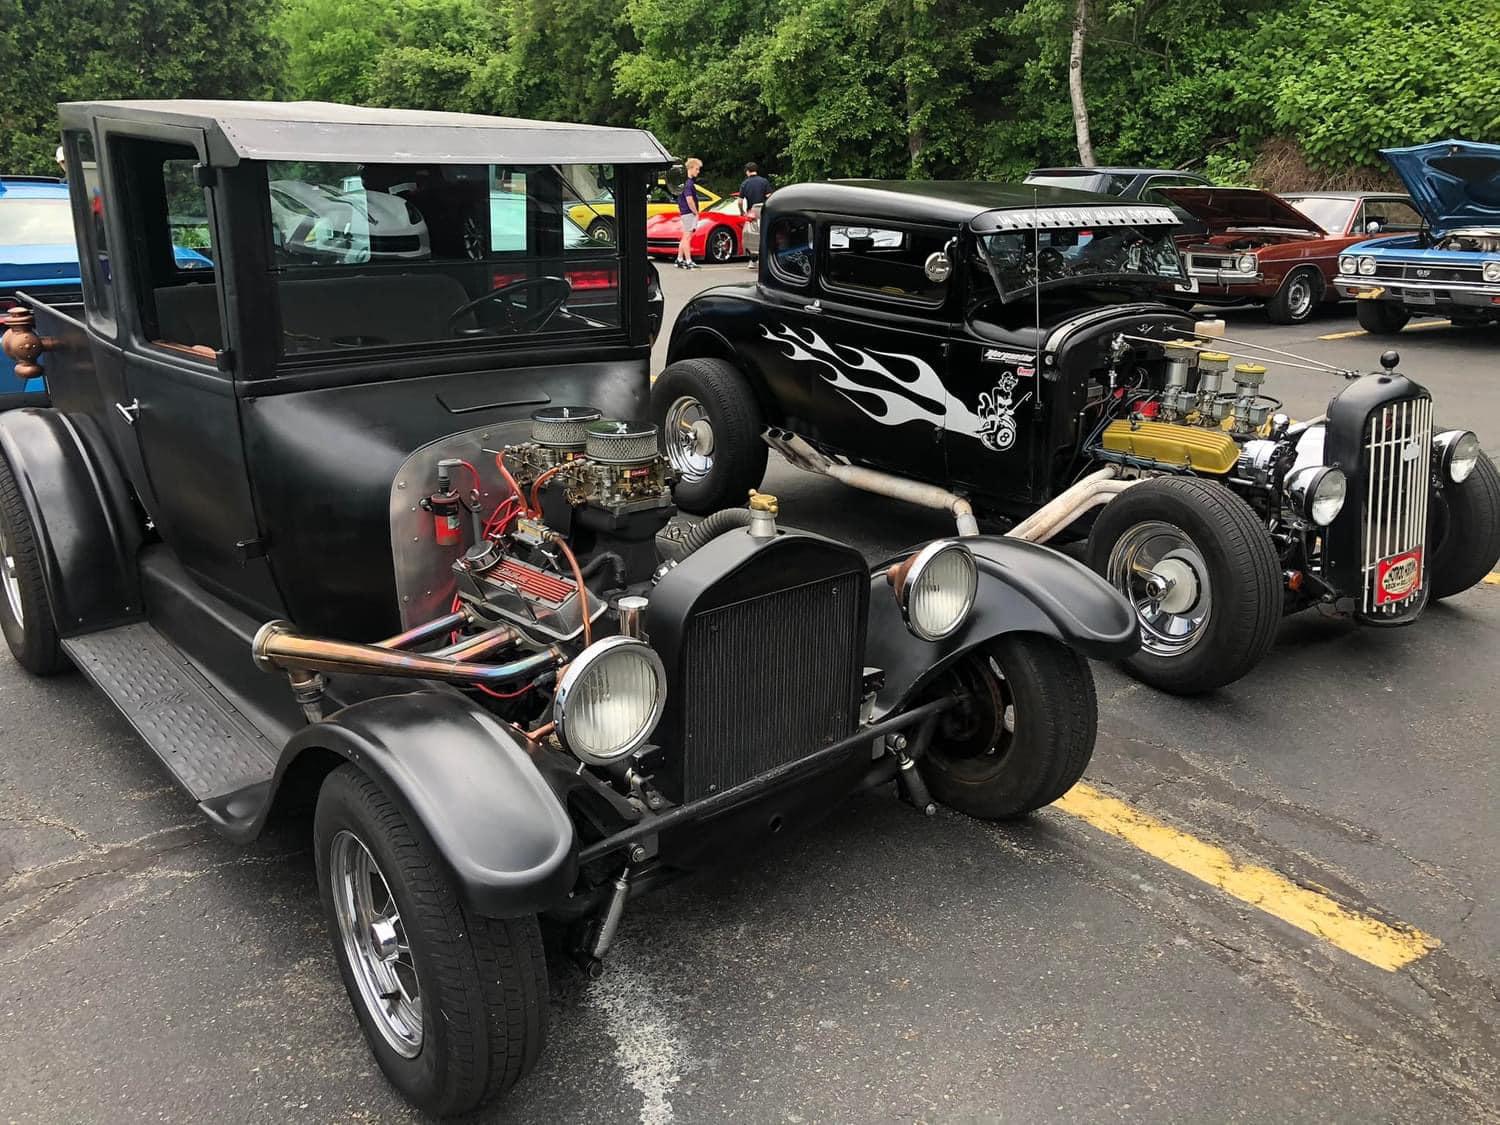 Pet Friendly Father's Day Car Show at Nay Aug Park